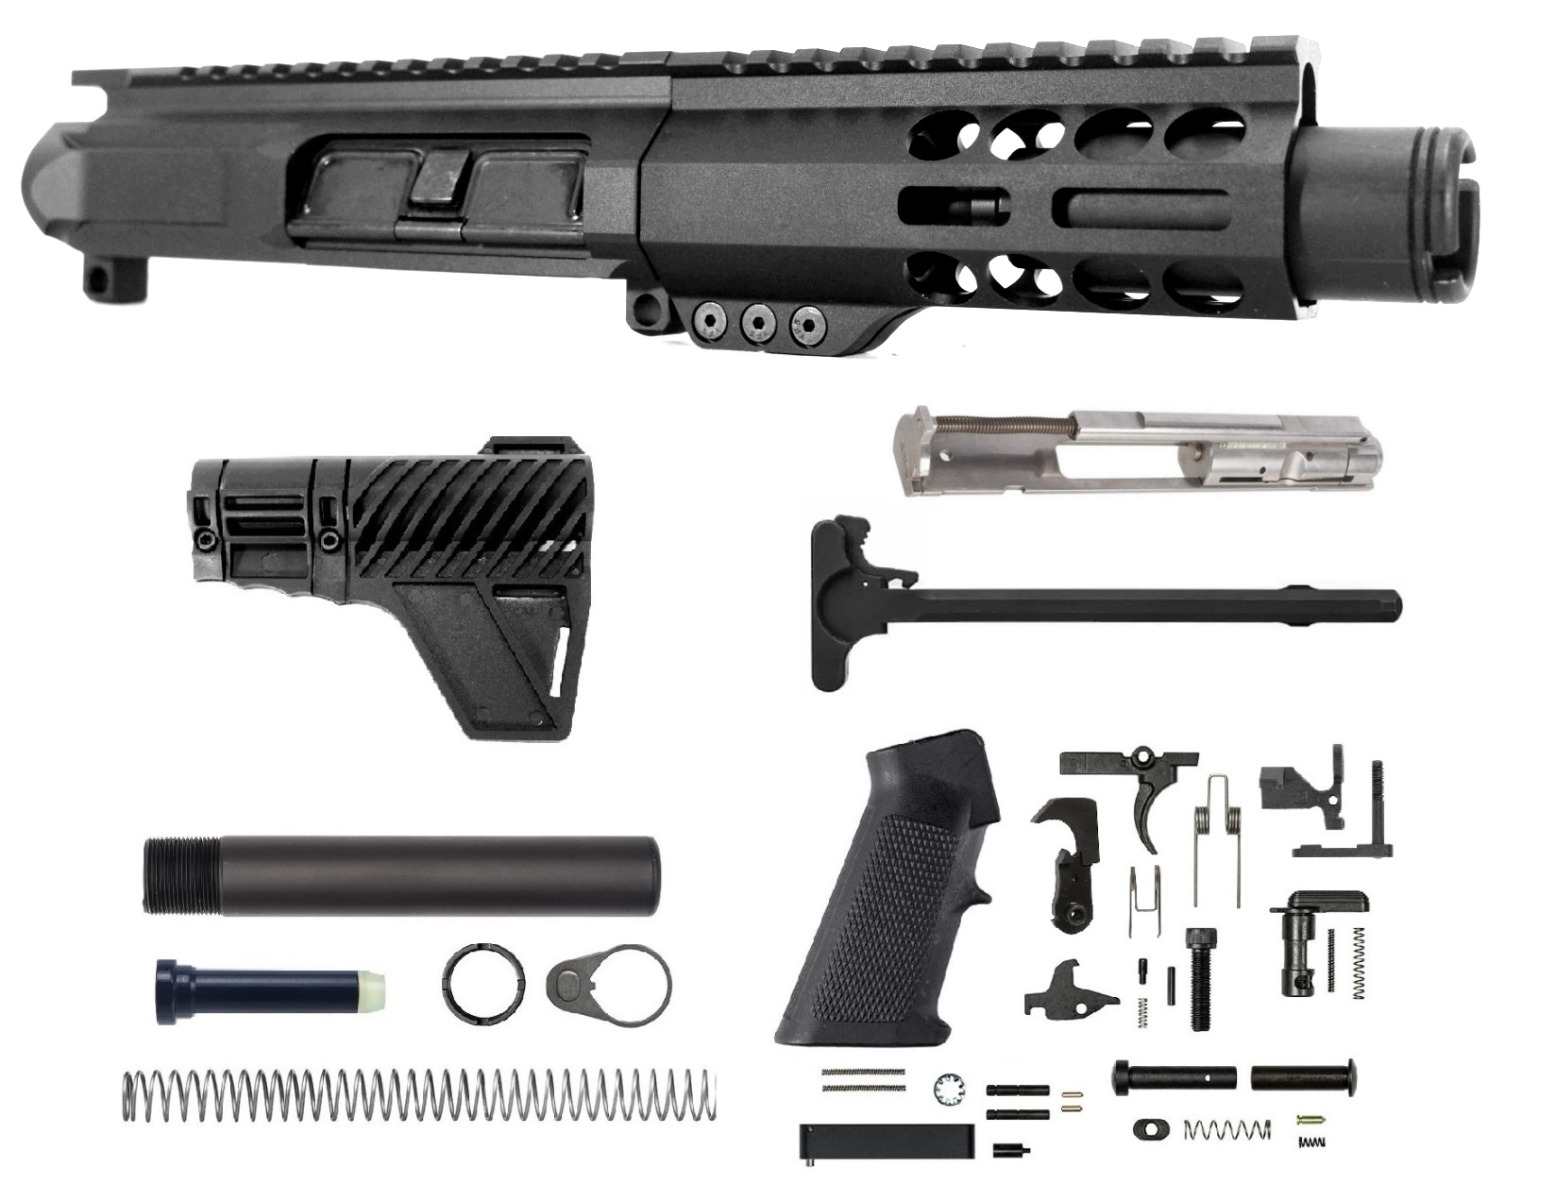 4.5 inch 22LR Upper Kit | Made in the USA